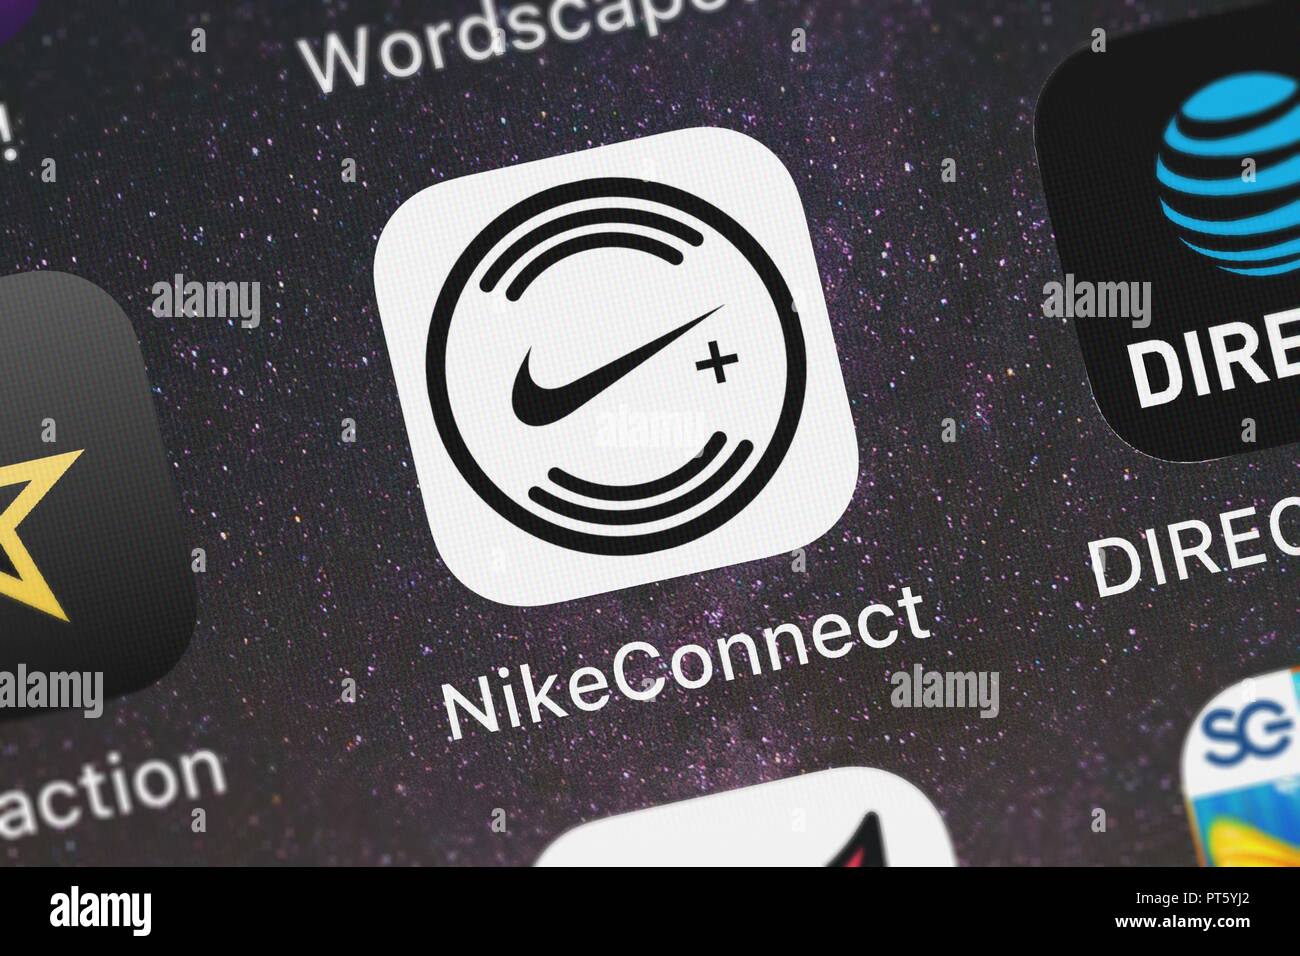 Nikeconnect High Resolution Stock Photography and Images - Alamy